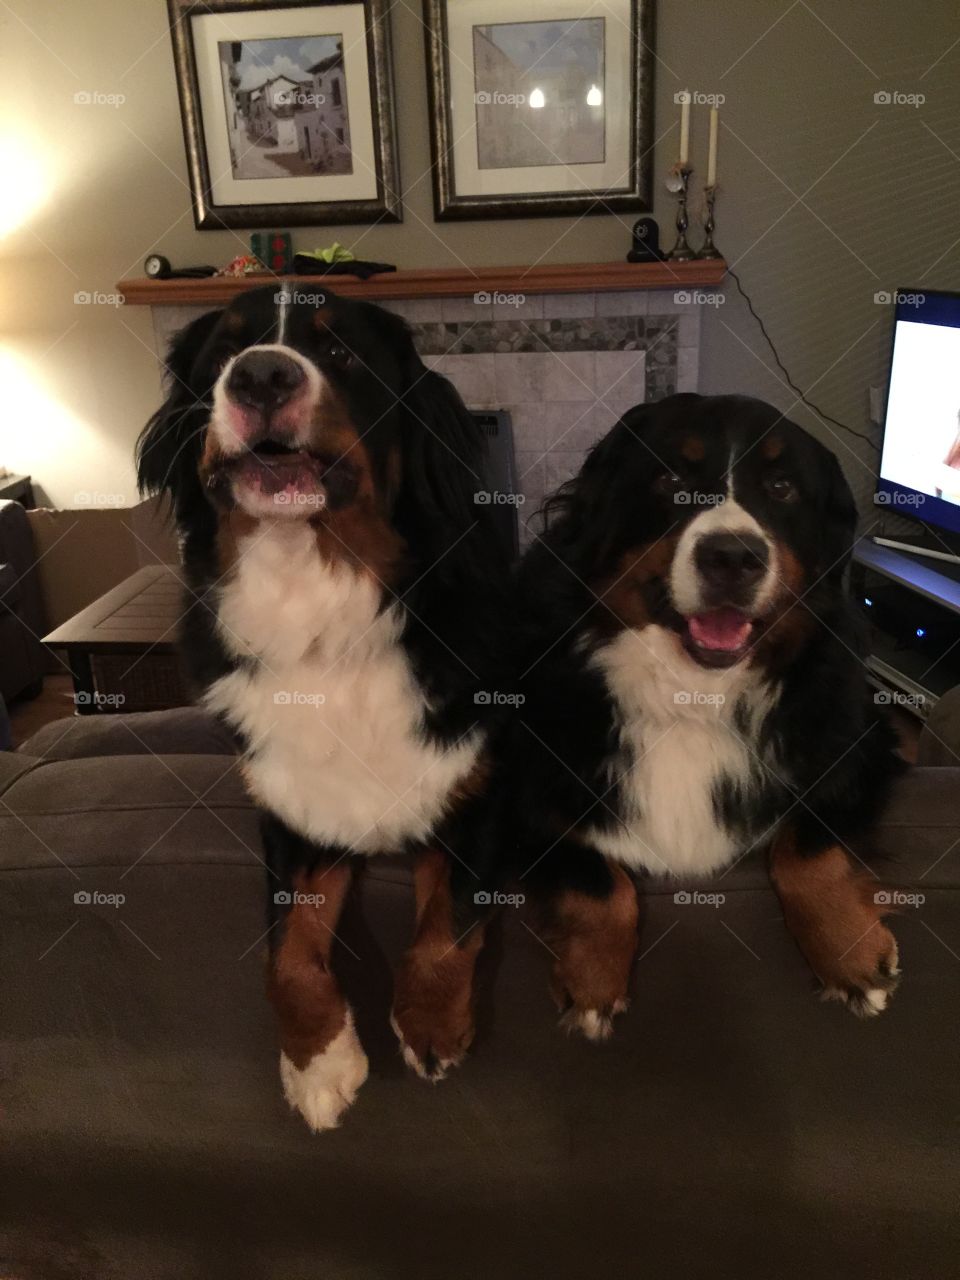 Two berners are better than one and they rule the couch by being their loveable cuddly selves!